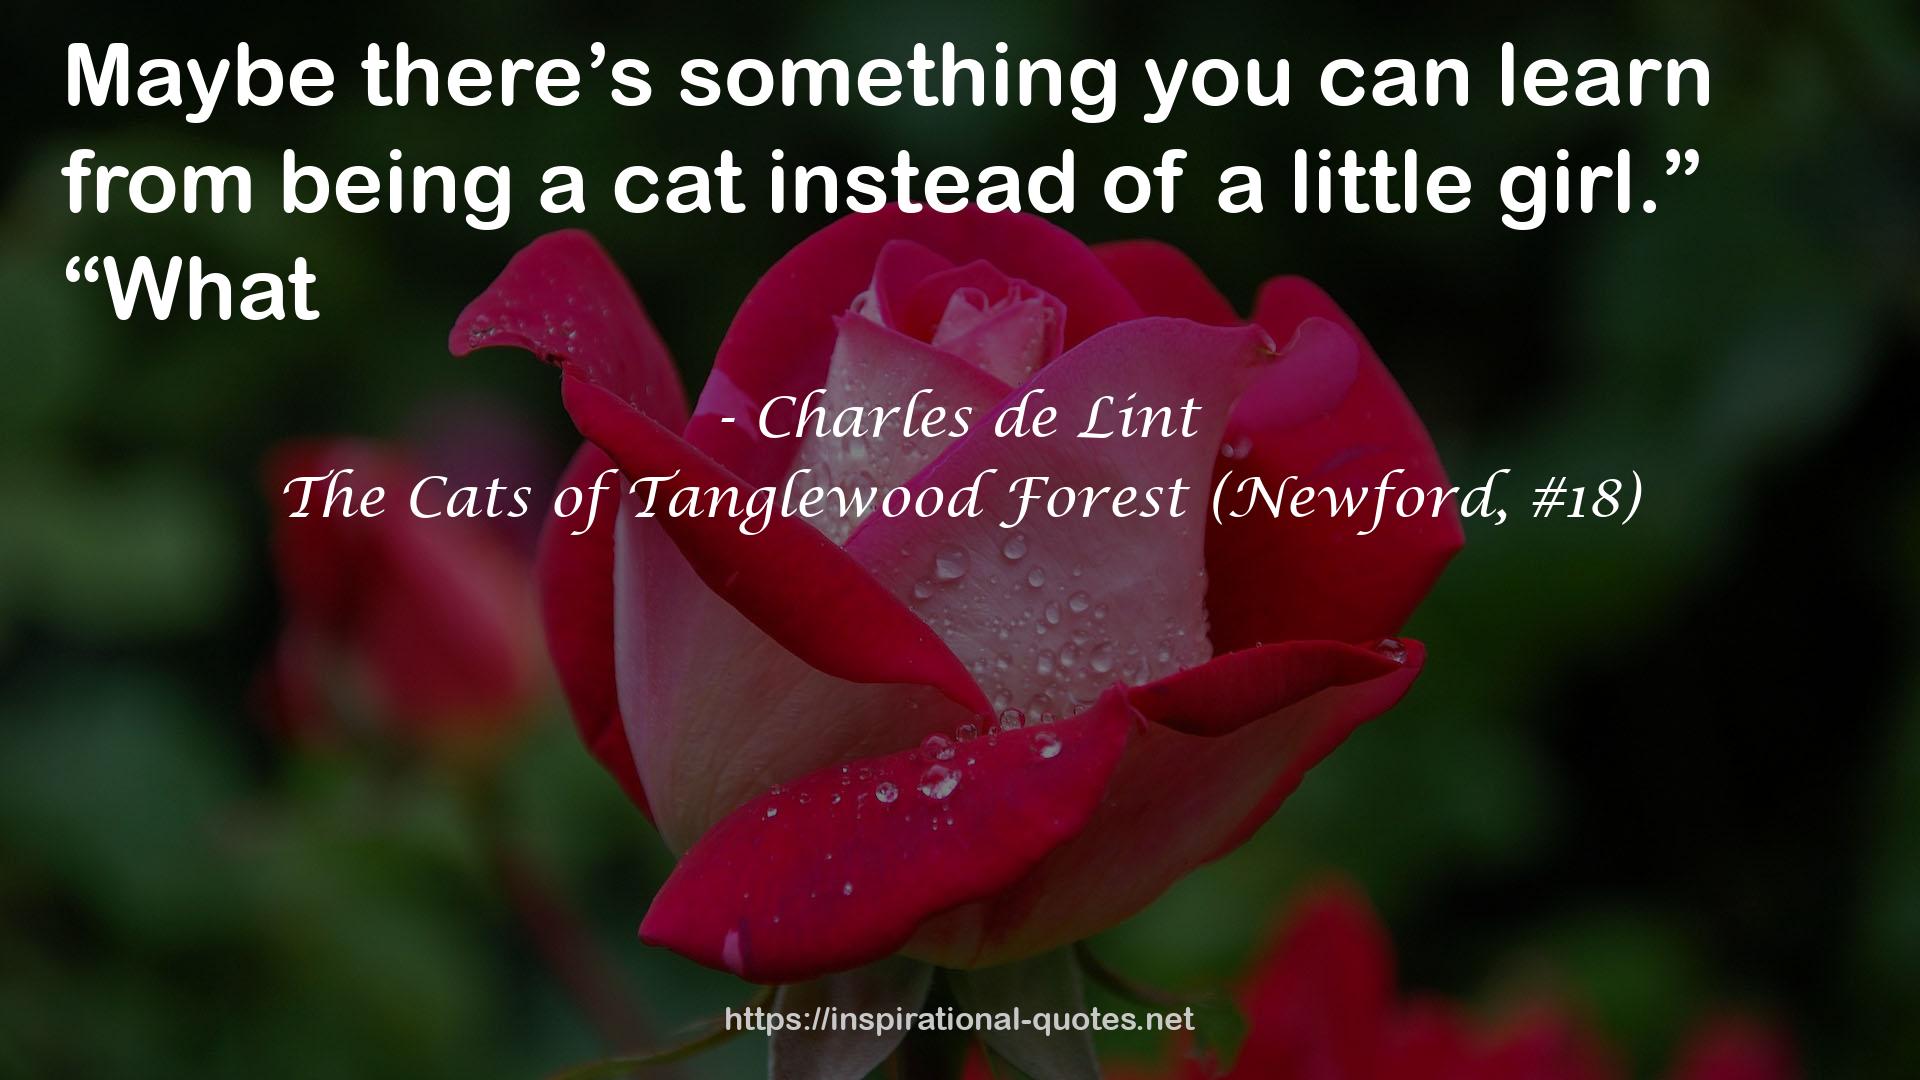 The Cats of Tanglewood Forest (Newford, #18) QUOTES